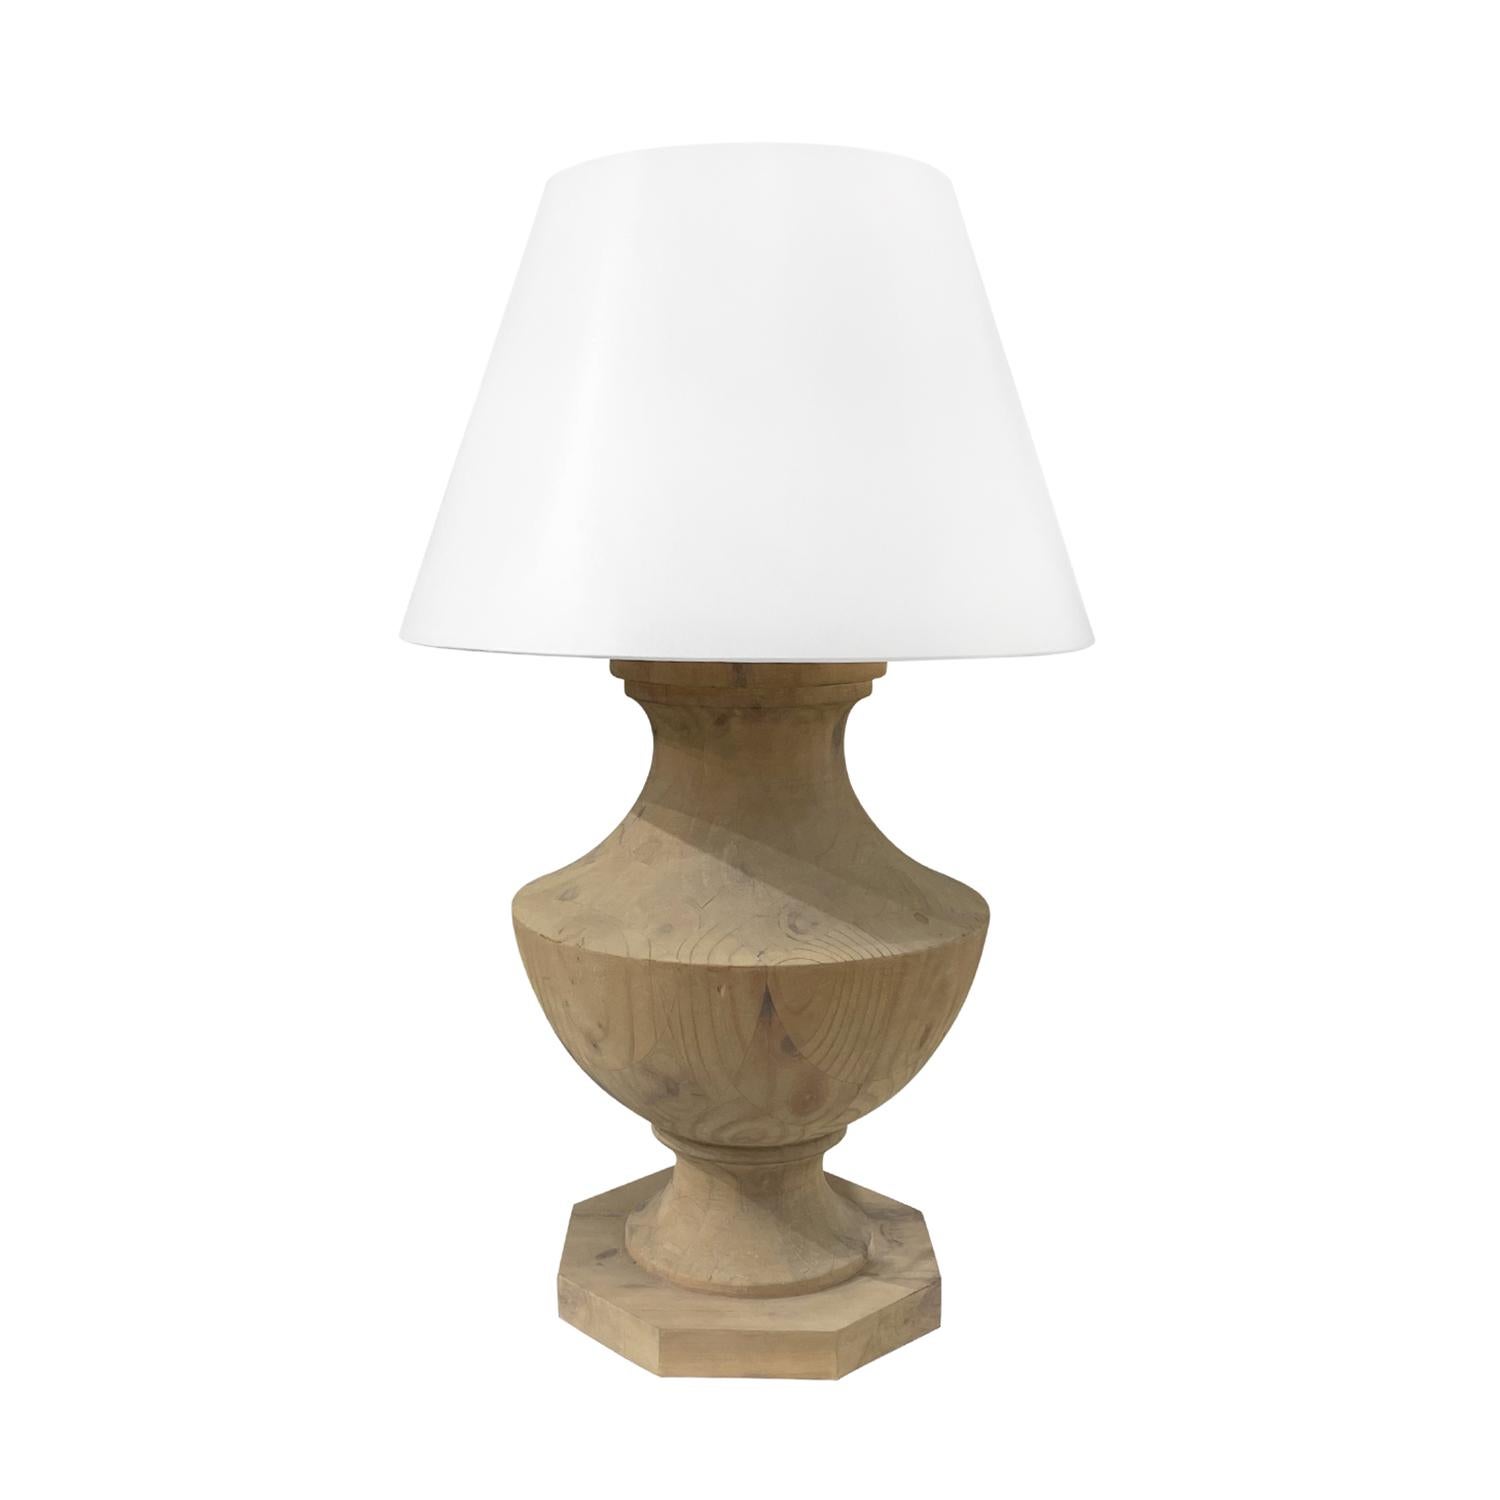 A vintage Mid-Century modern French pair of large table lamps with a new white round shade, made of hand crafted bleached Walnut in good condition. The baluster shaped lights are detailed with a polished brass finial, featuring a two light socket.